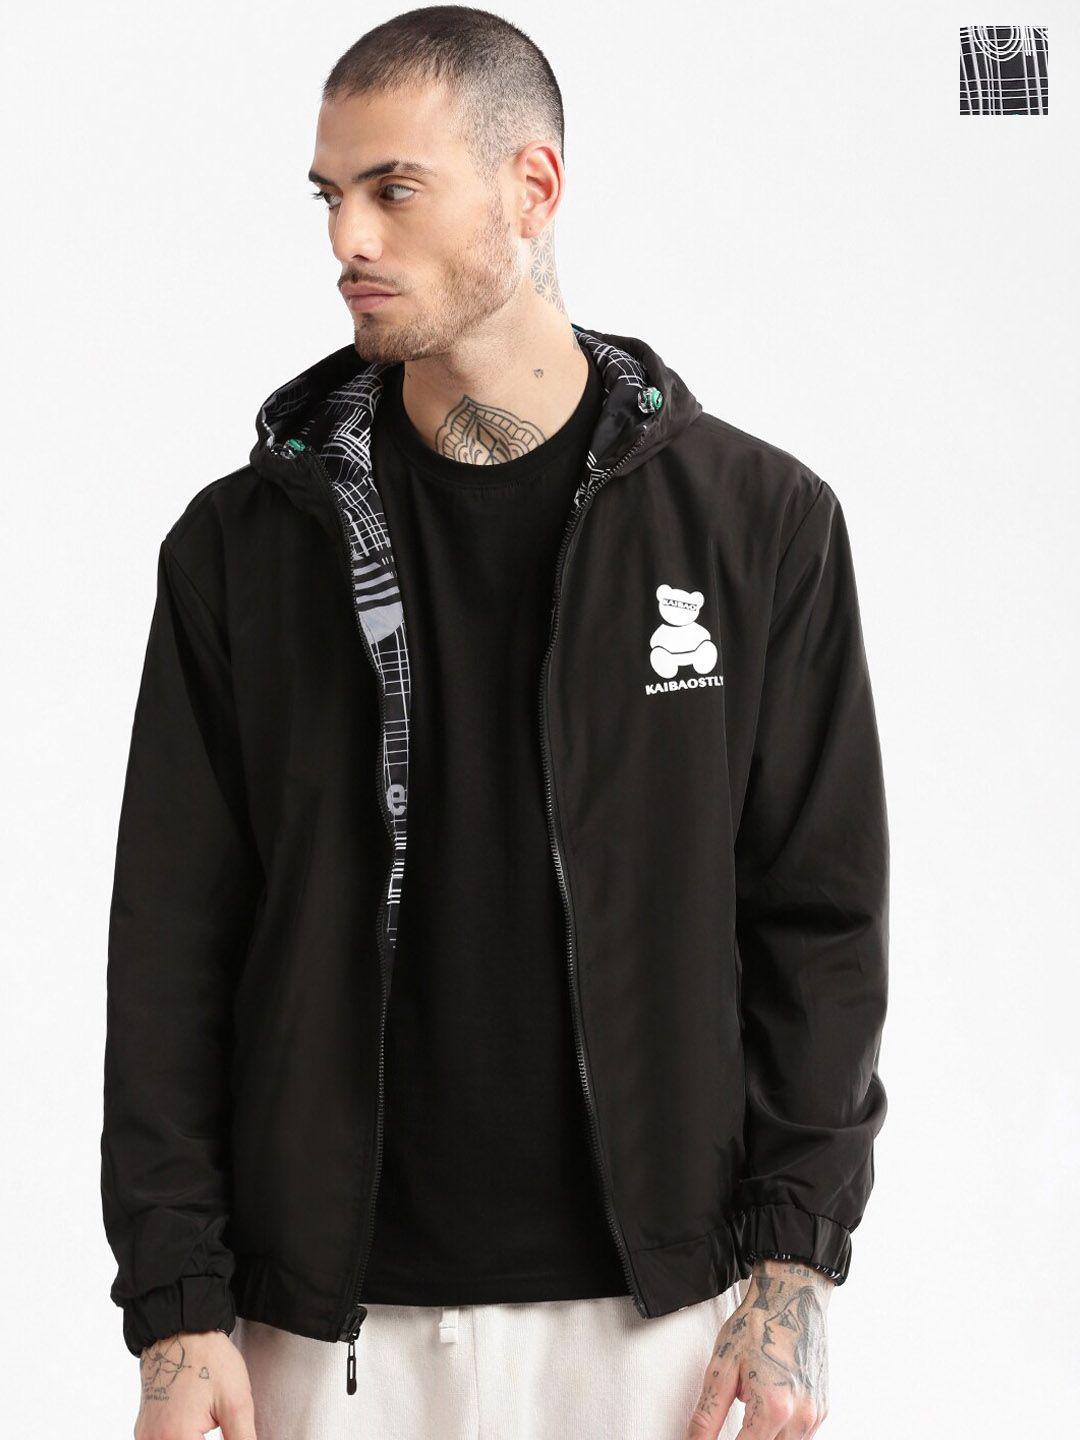 showoff hooded windcheater tailored jacket